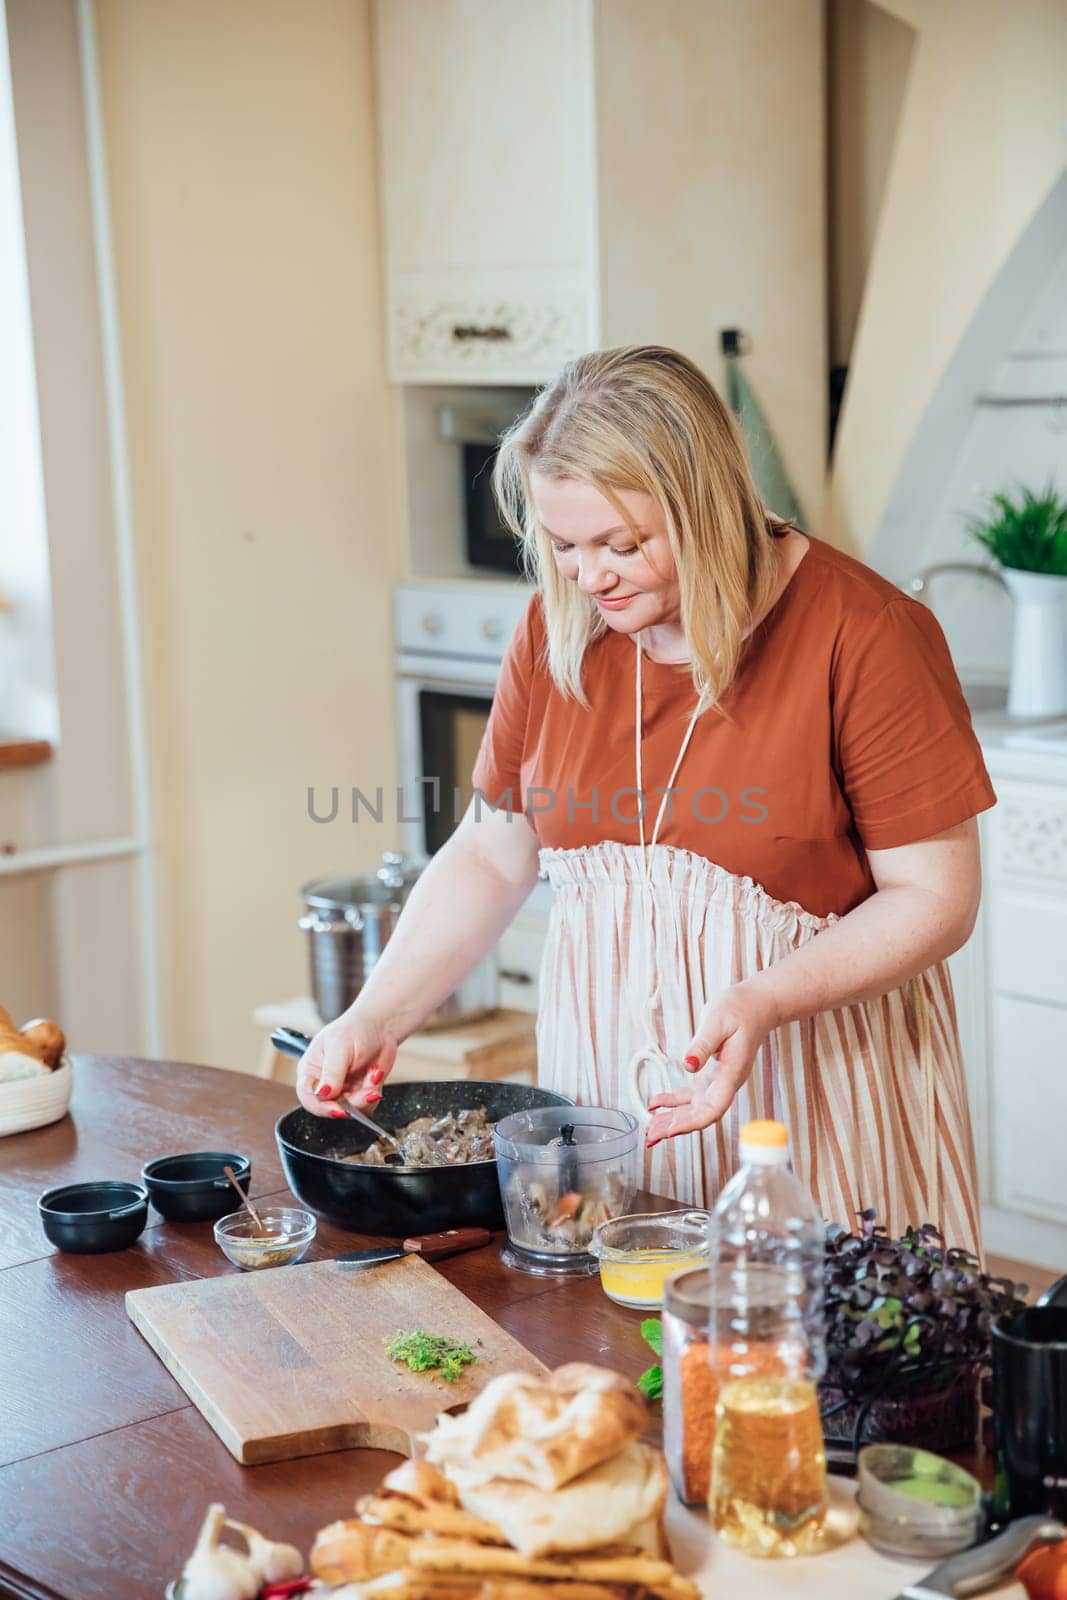 Woman cook at home in kitchen preparing delicious food by Simakov